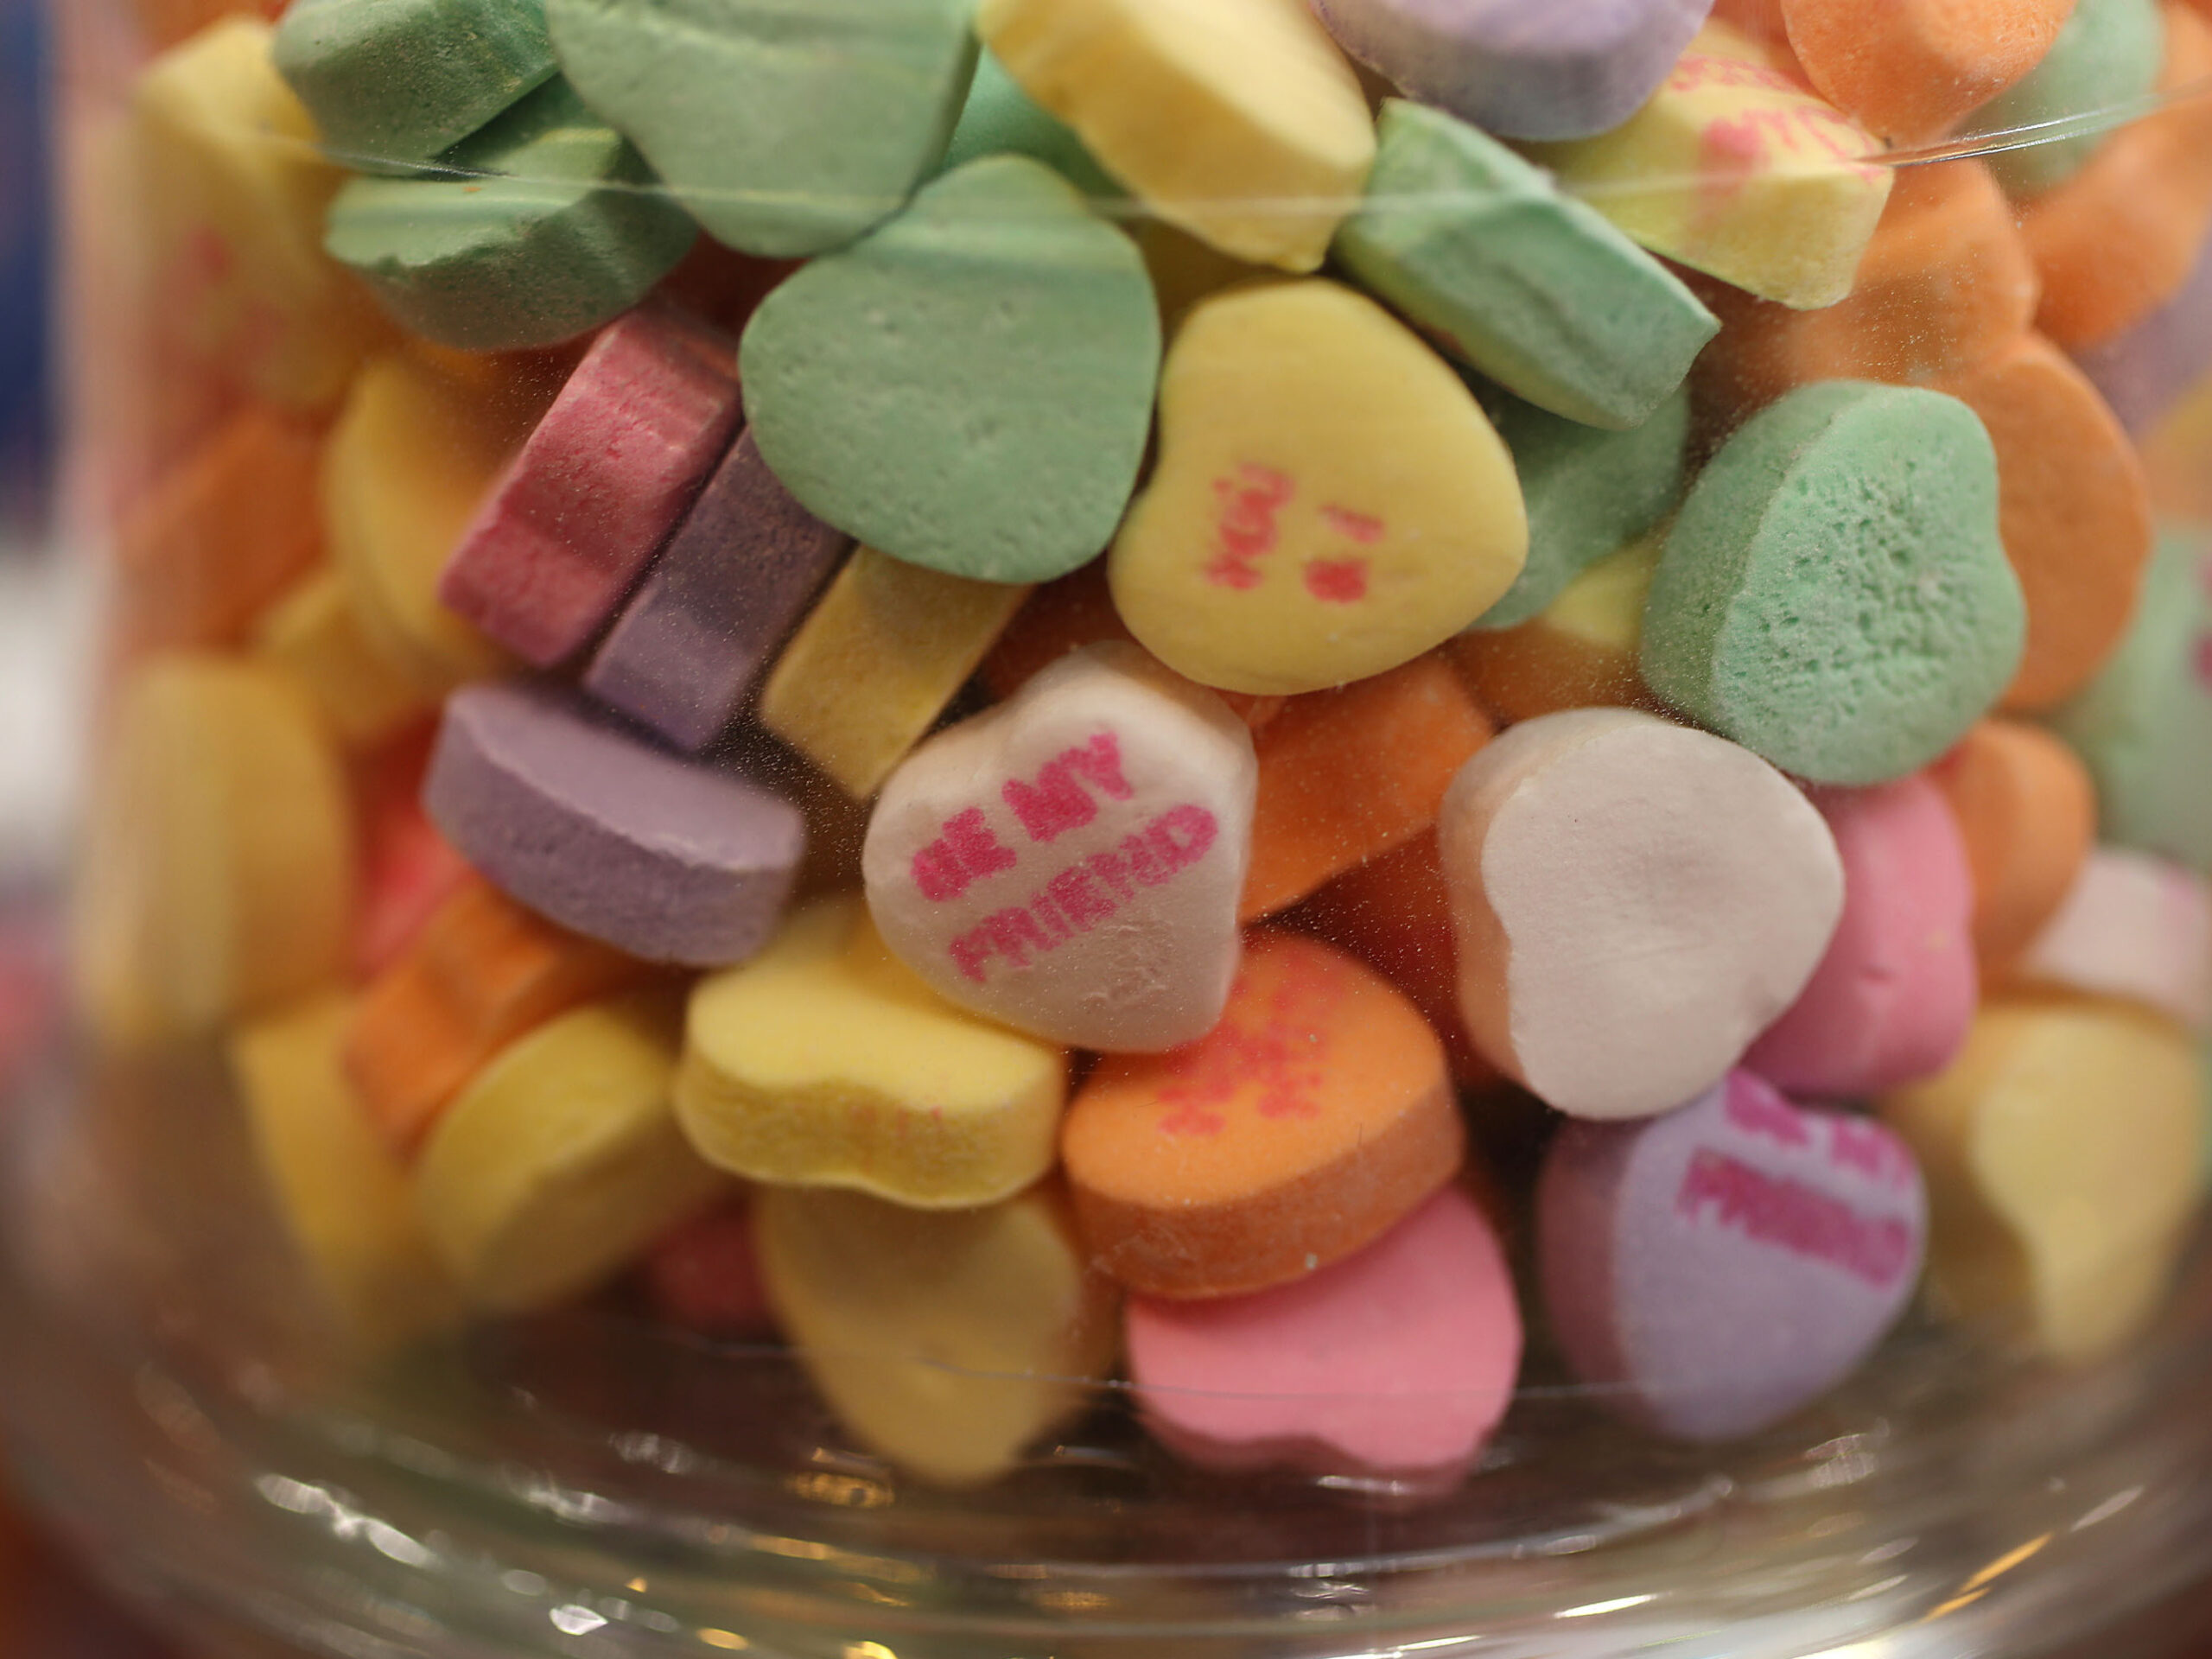 Skip candy this Valentine’s Day. Here are some healthier options